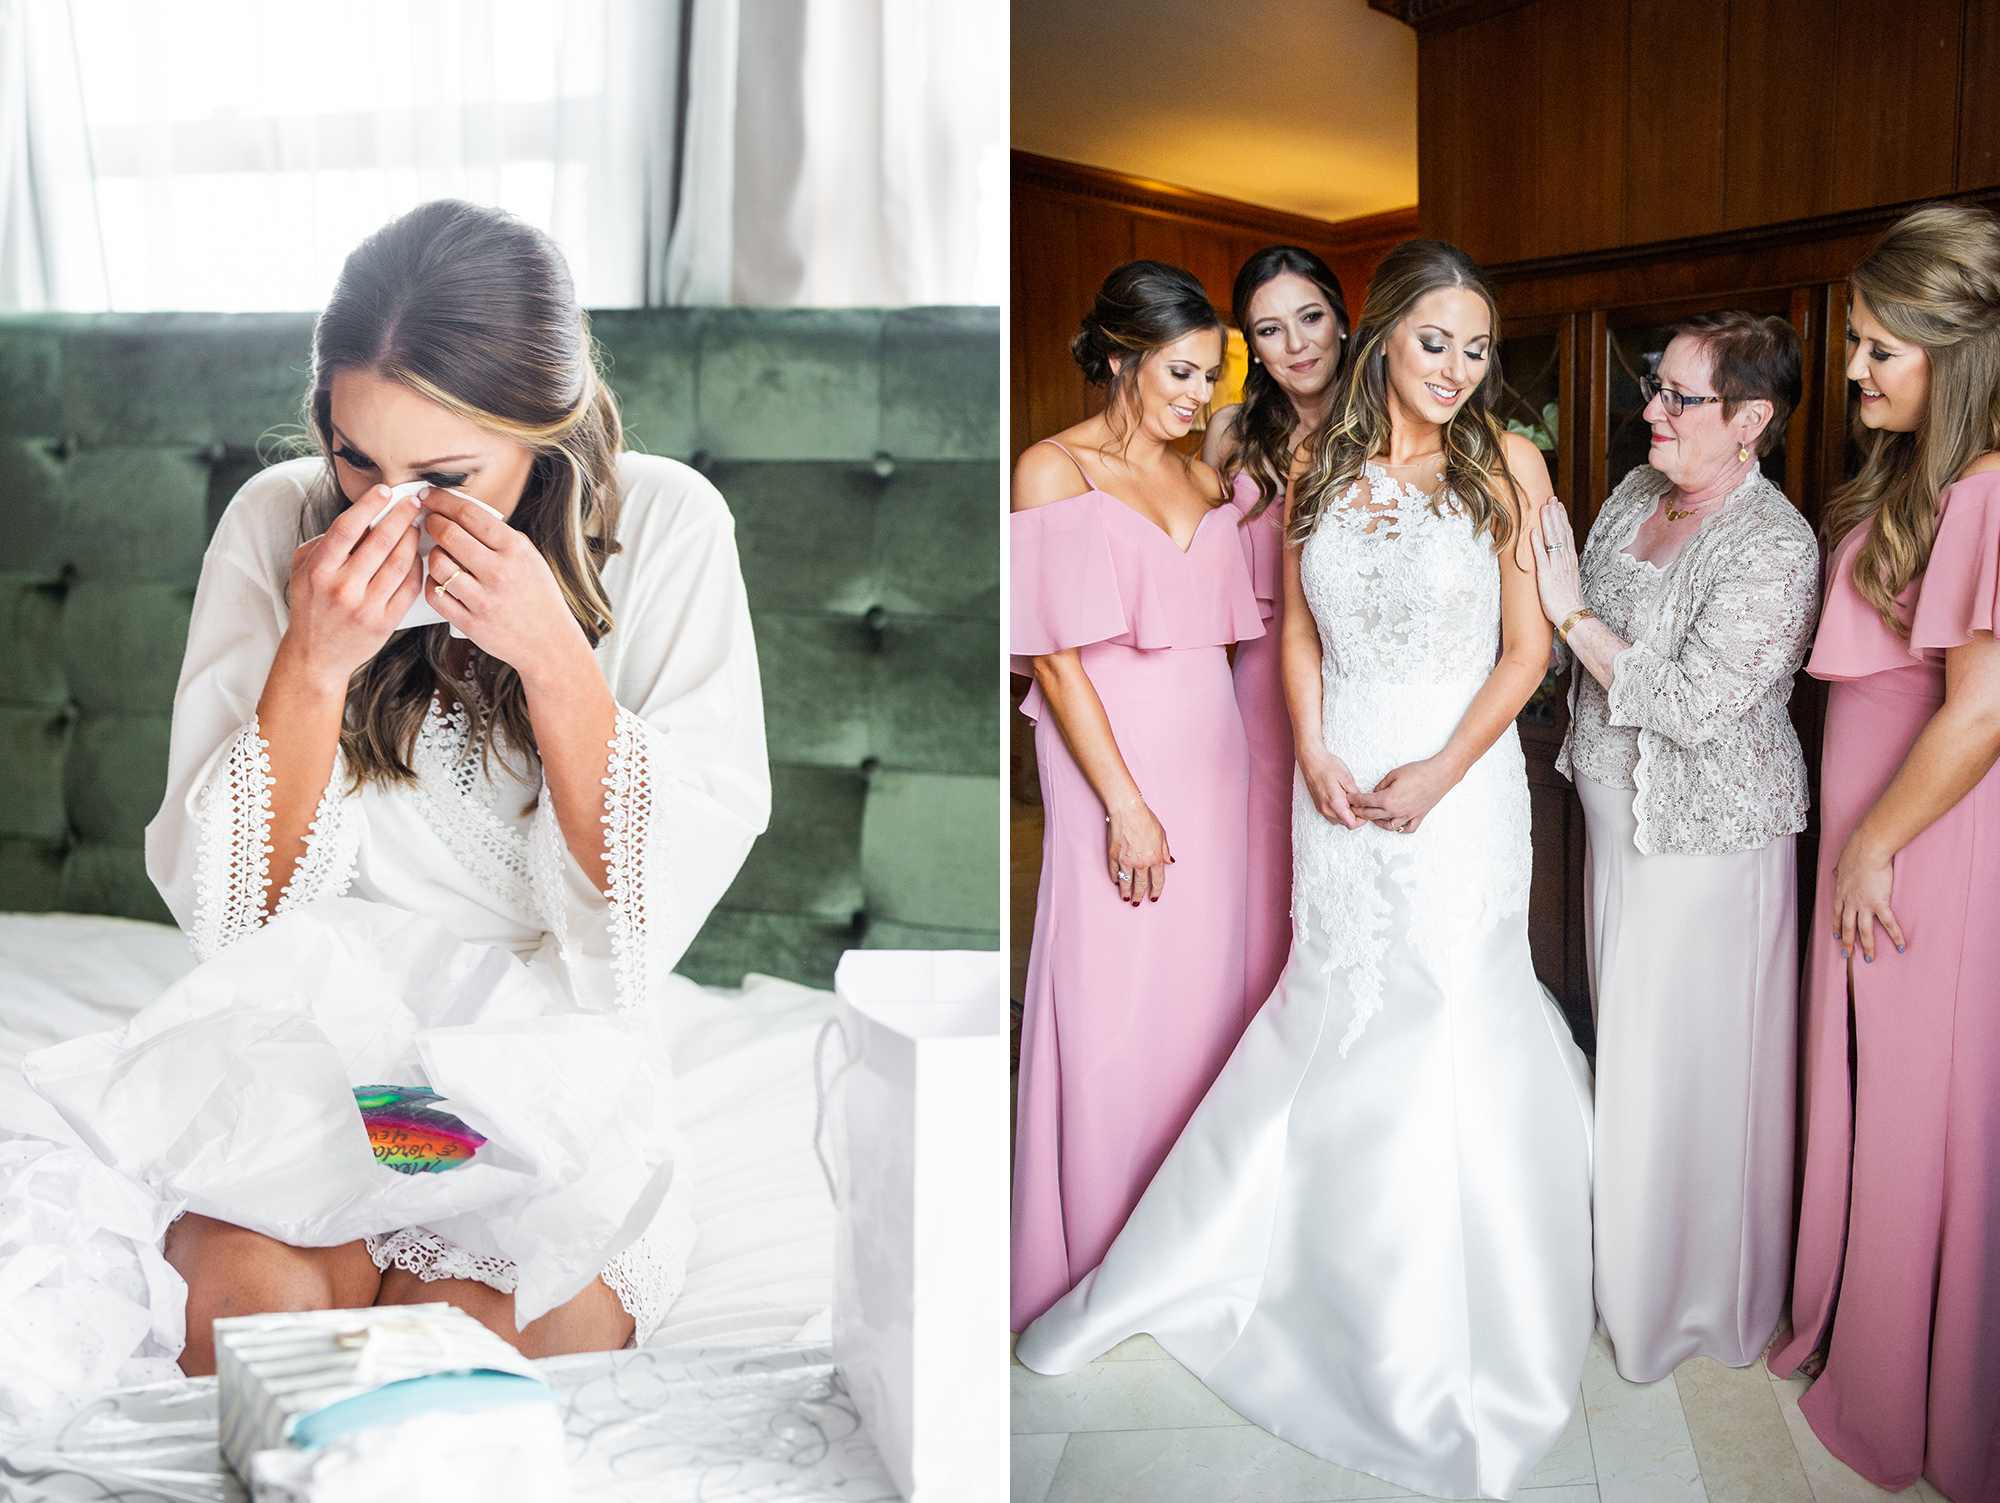 Bride crying; Bride getting dressed with bridal party